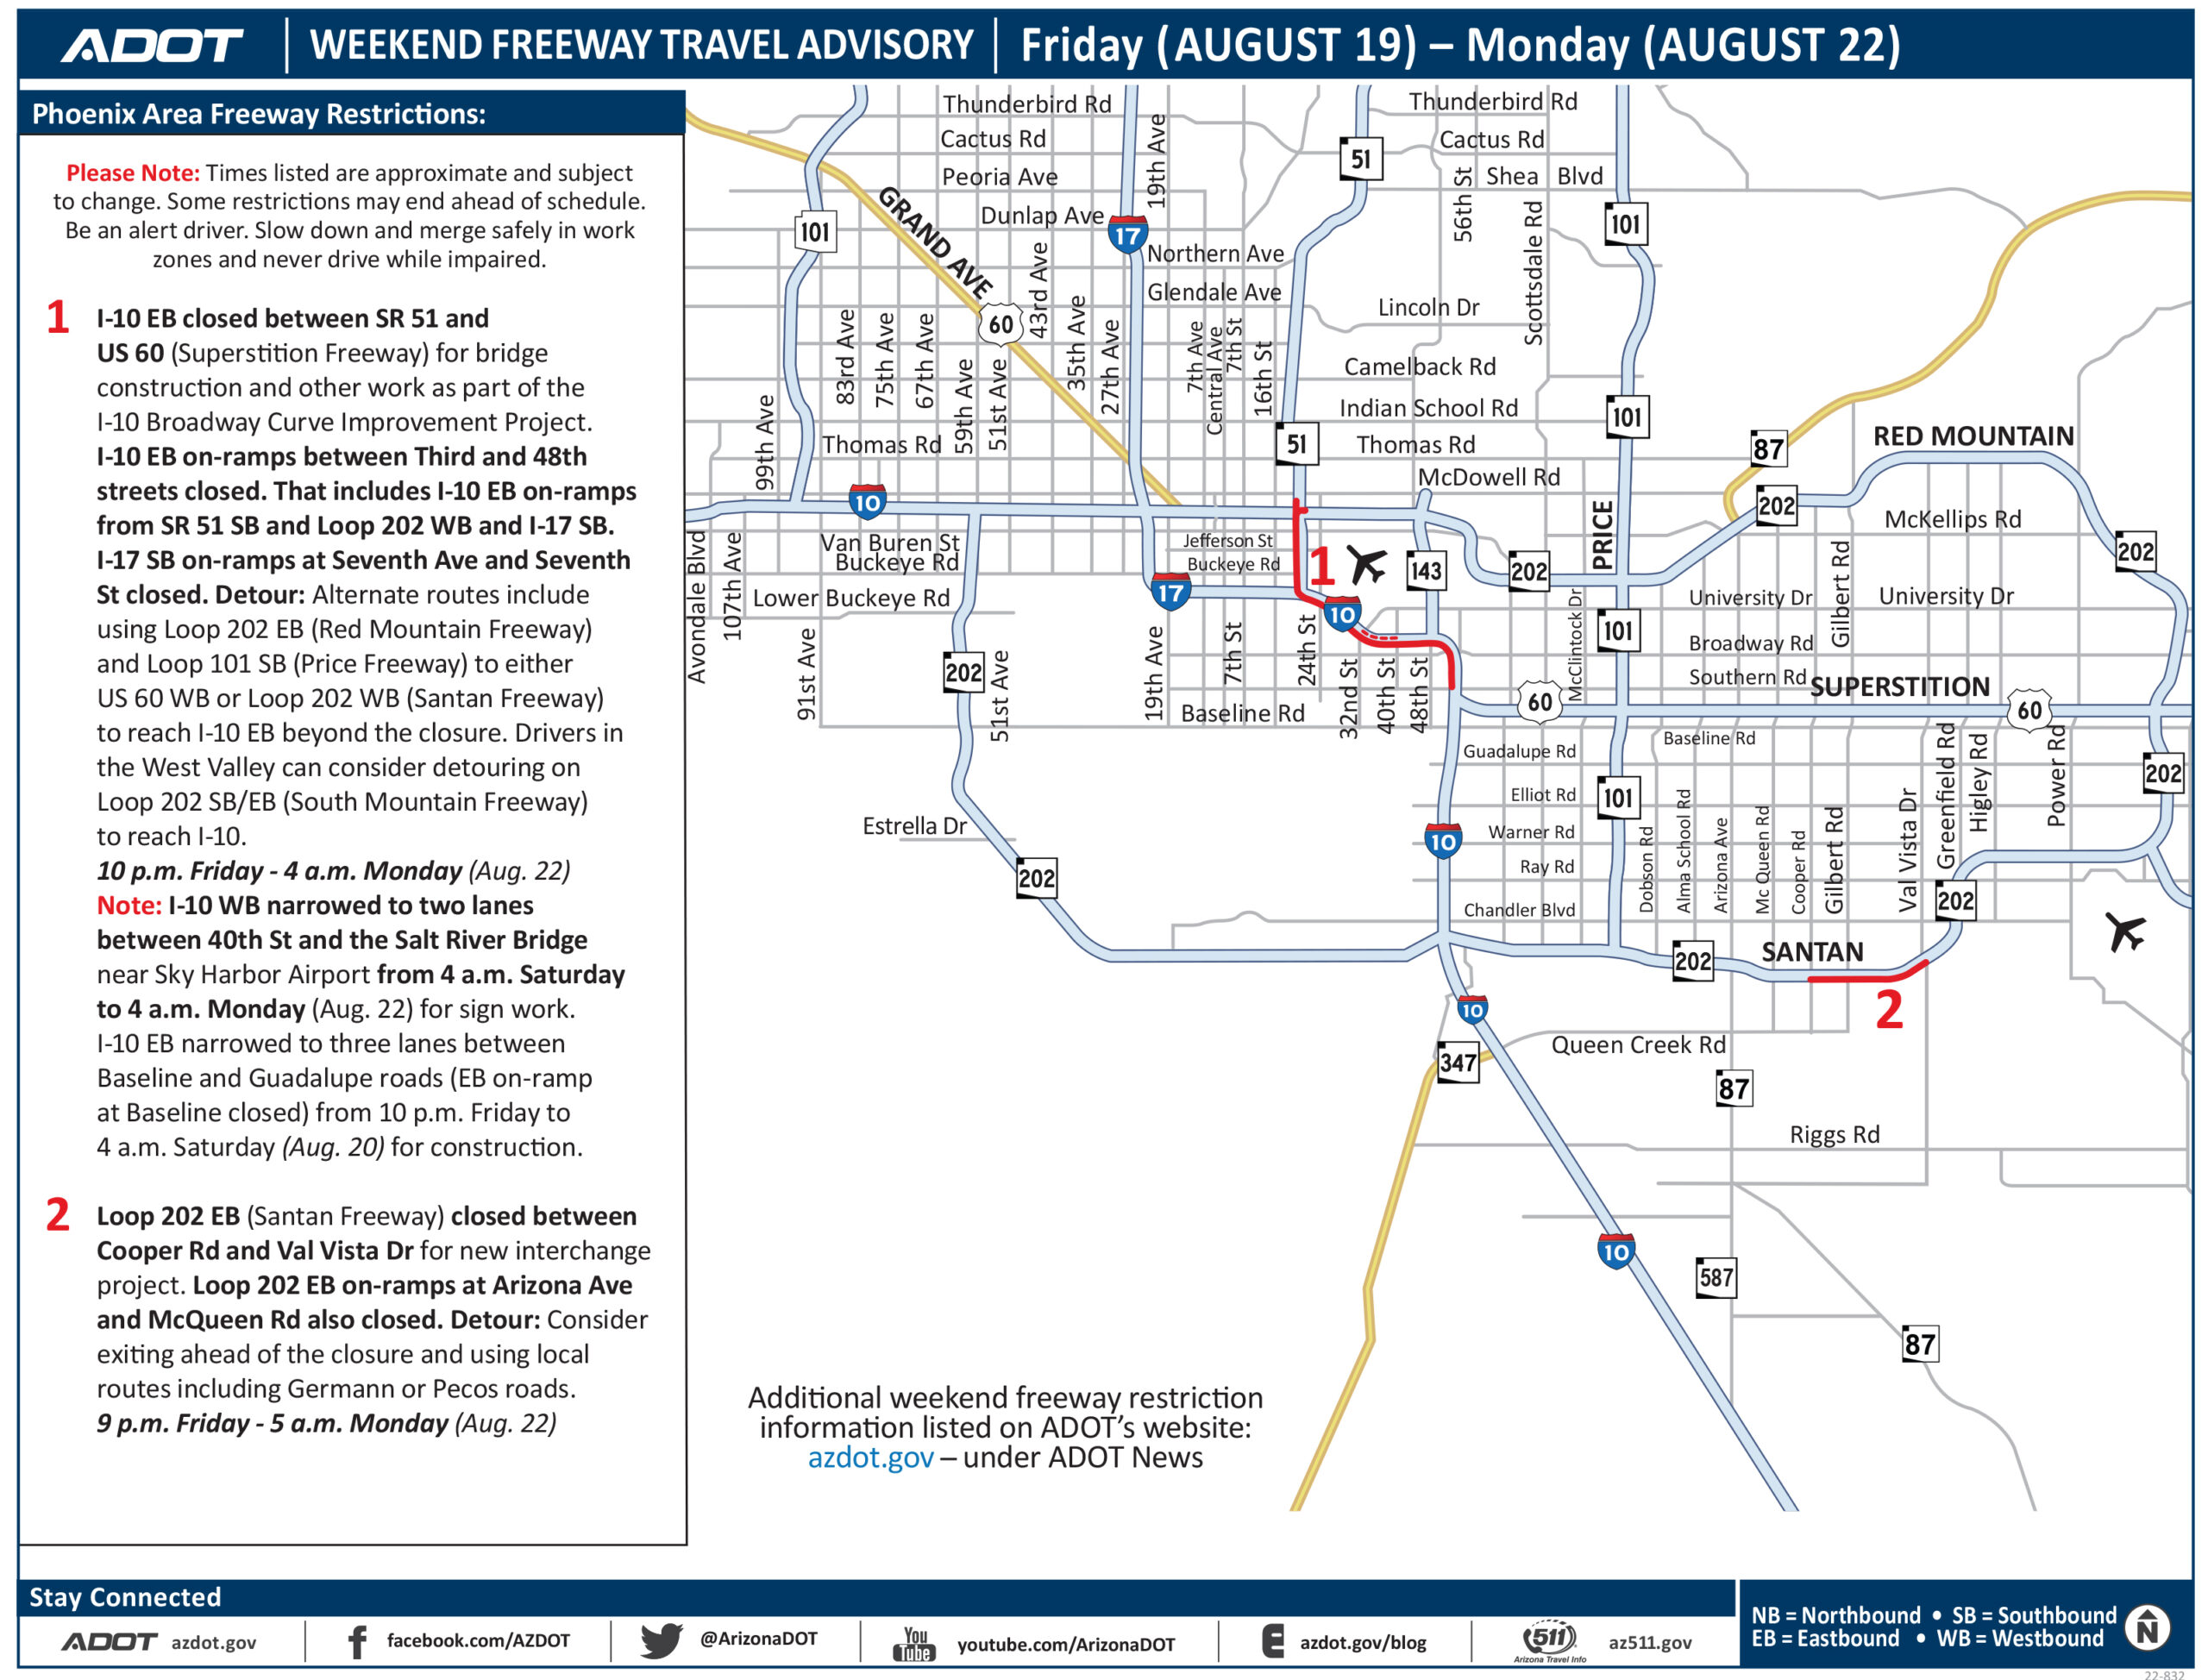 Weekend Phoenix-area freeway restrictions and closures, Aug. 19–22